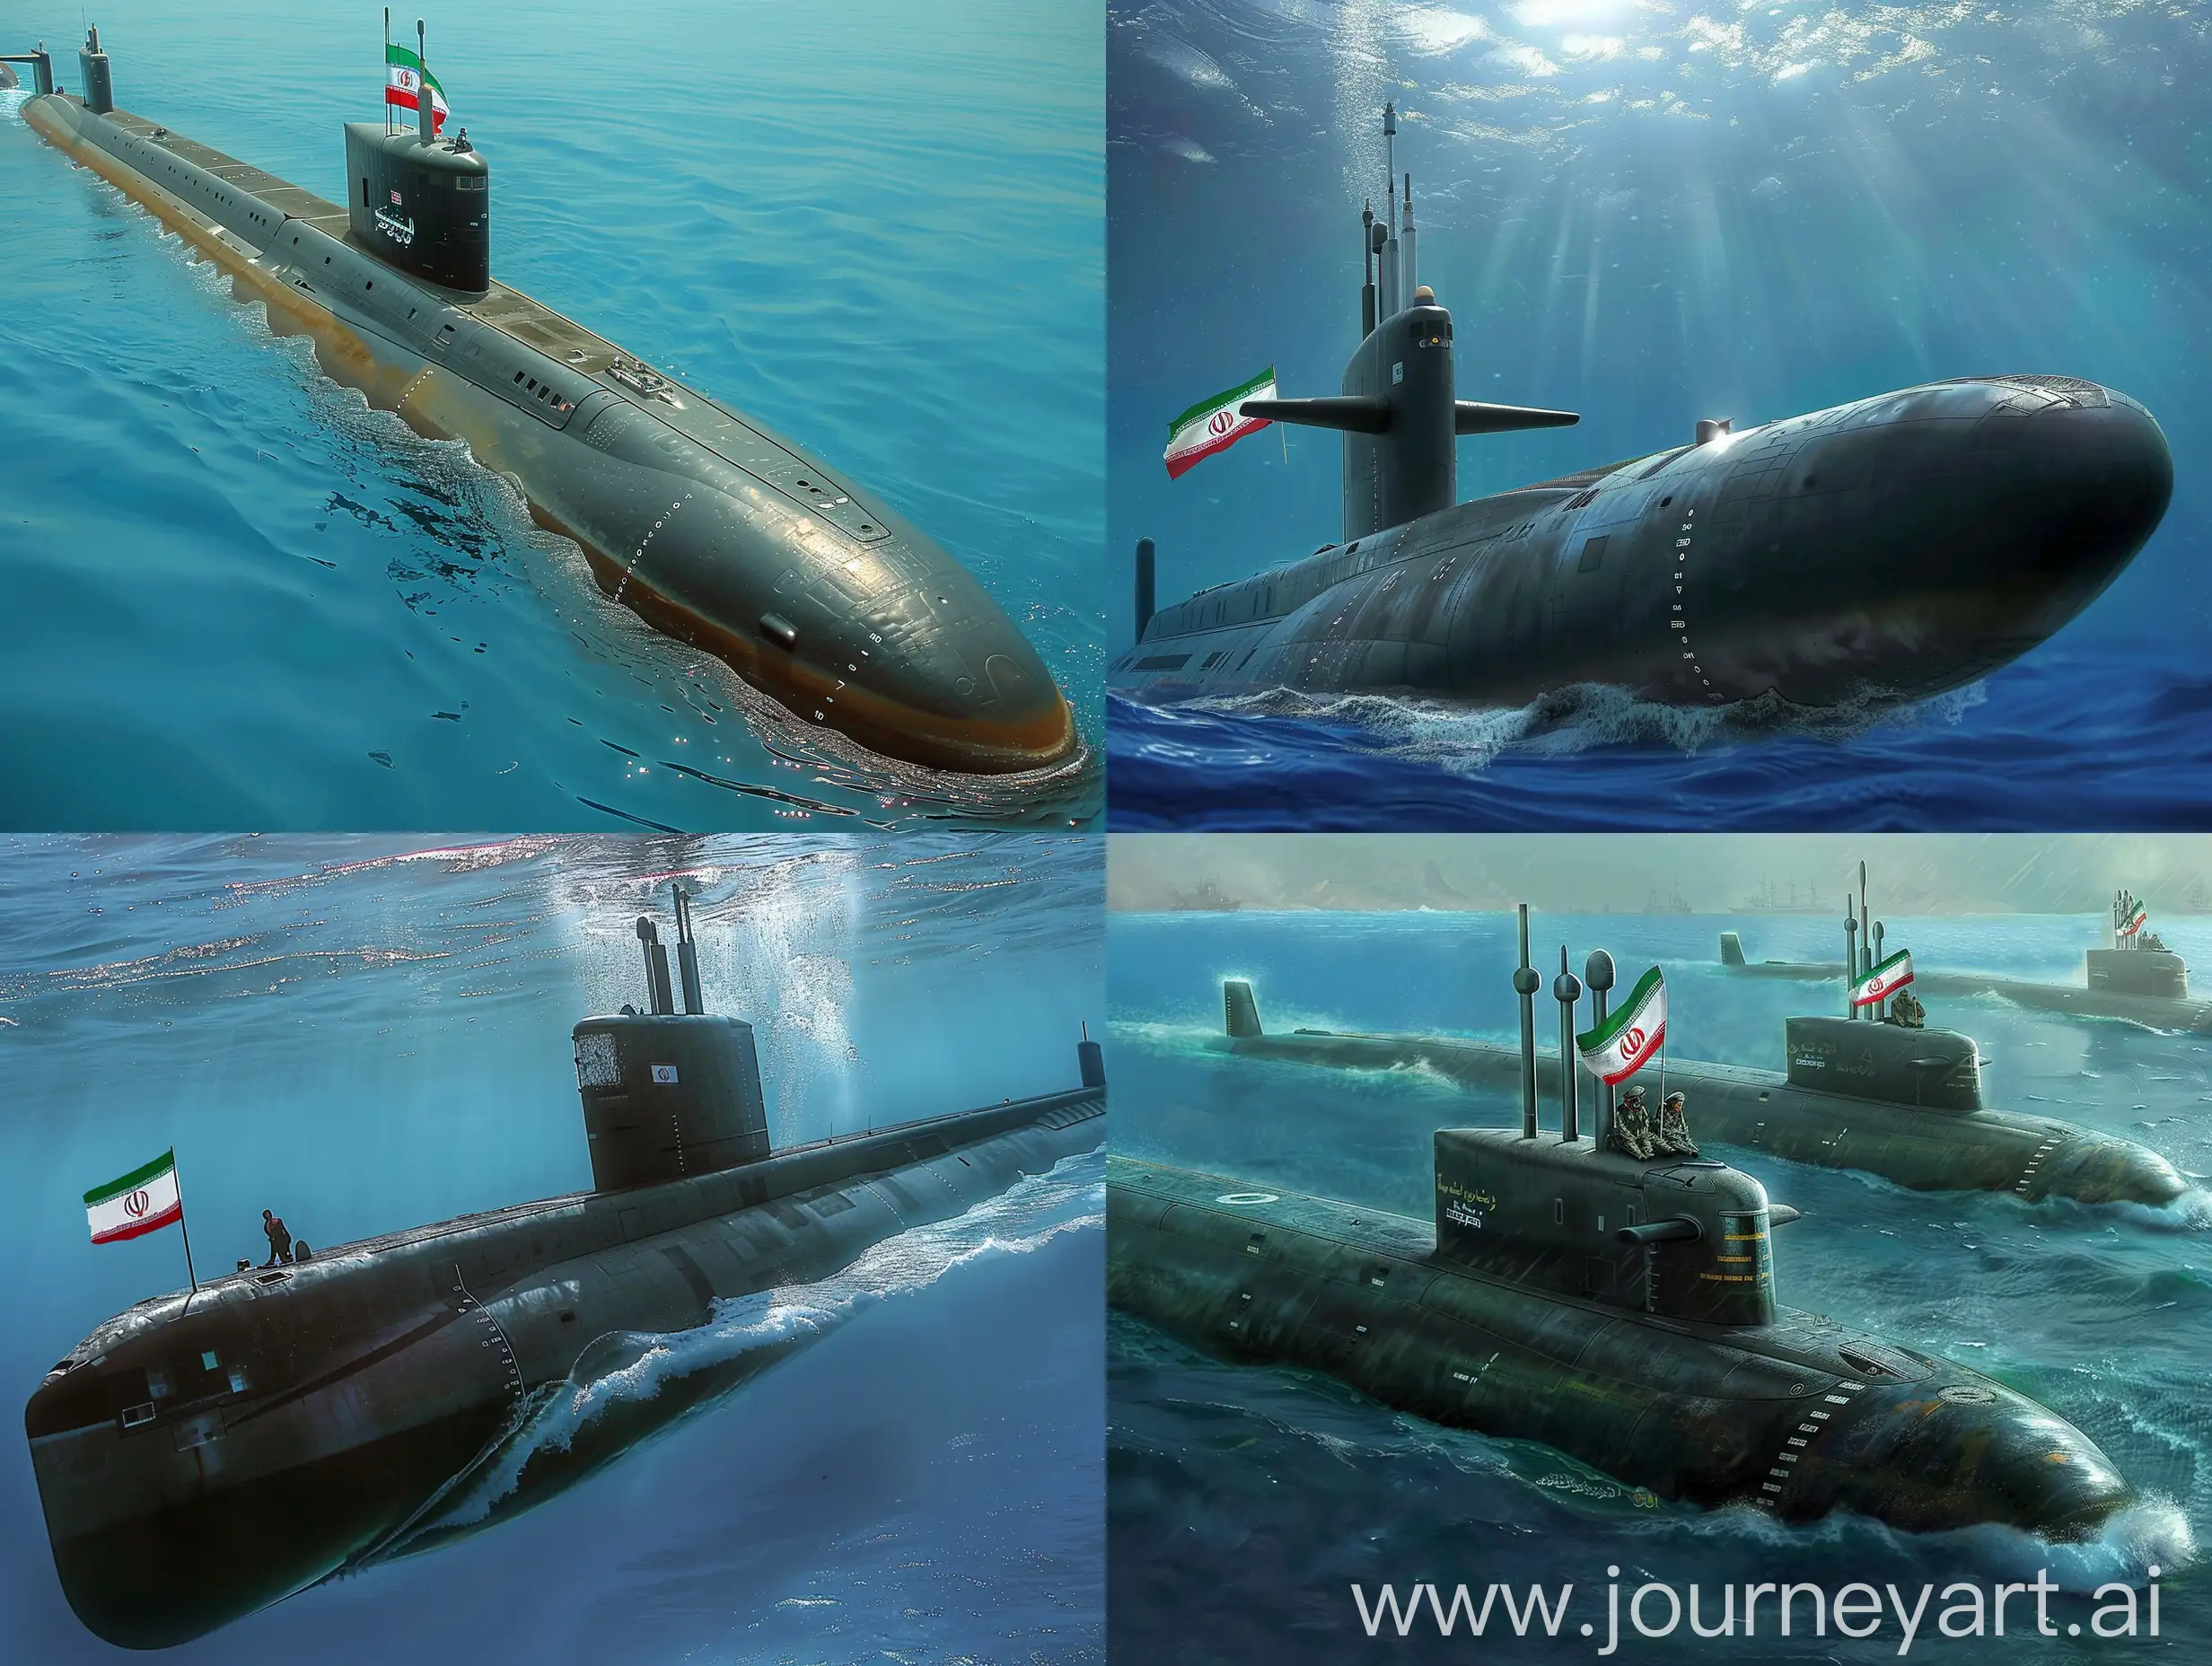 iranian submarines underwater and beautiful sea planets like a heaven , a glorious seen with irans flag on submarines